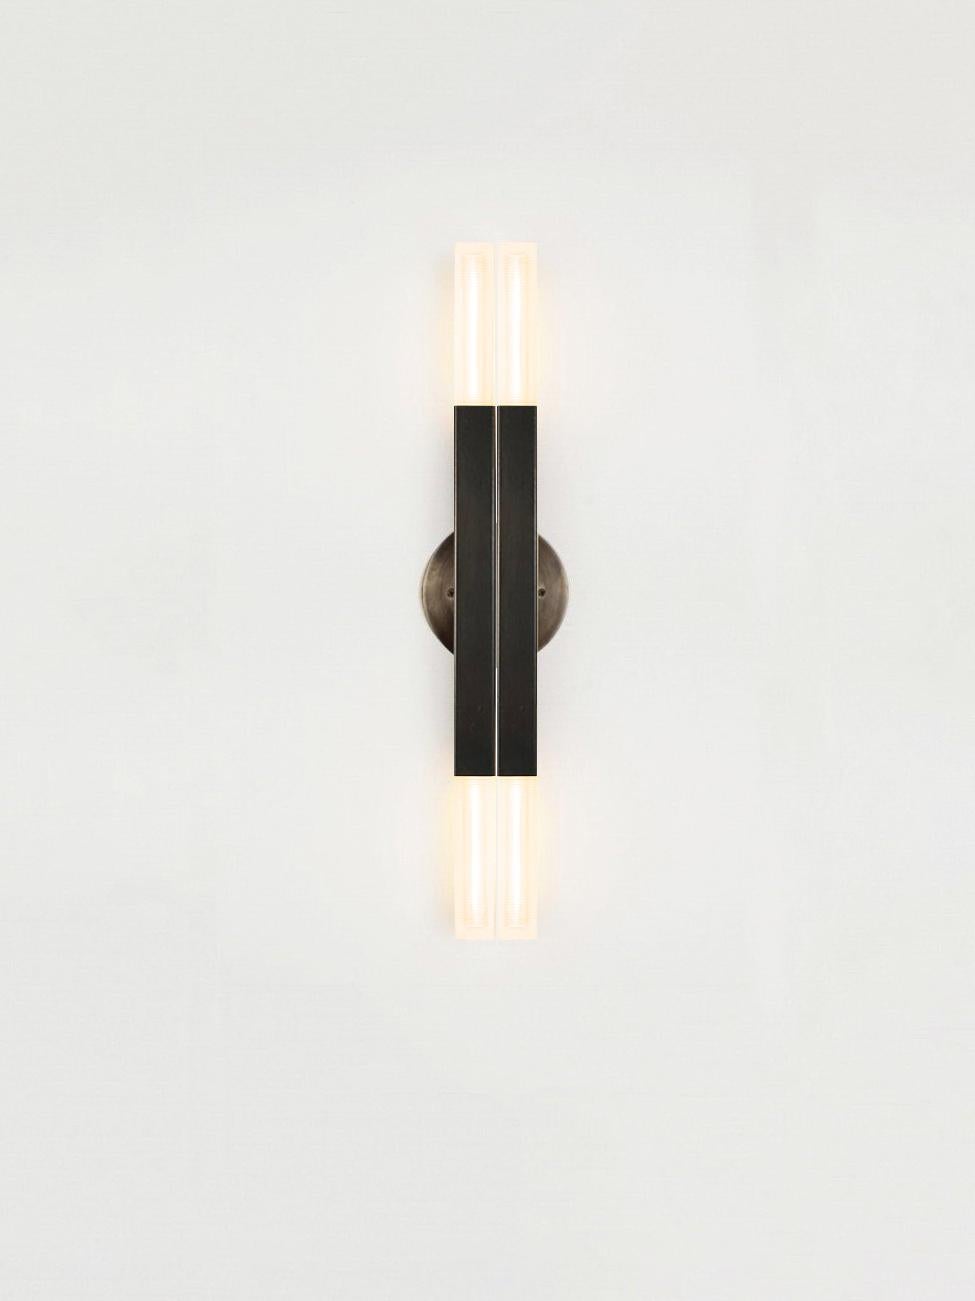 Daikon Studio  POST  KoKo Sconce-Large

The KoKo Sconce-Large celebrates the poetic dialogue between light and form to create a fixture that leans into the timeless and iconic. Meticulously crafted by hand in our studios. Horizontal or vertical